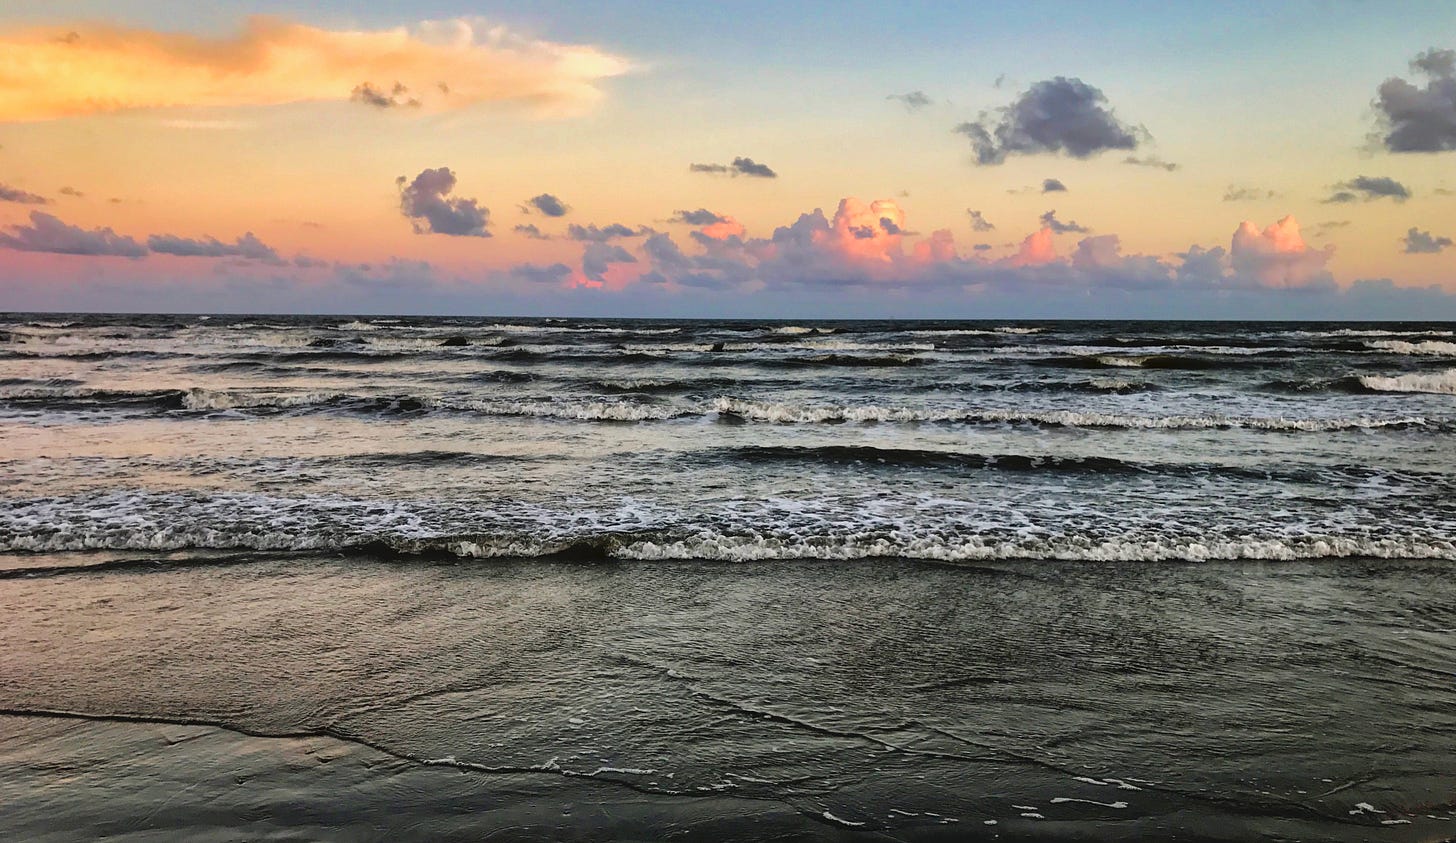 The waves rolling onto the shore with a sky of blue and orange, peach and grey clouds meeting the horizon